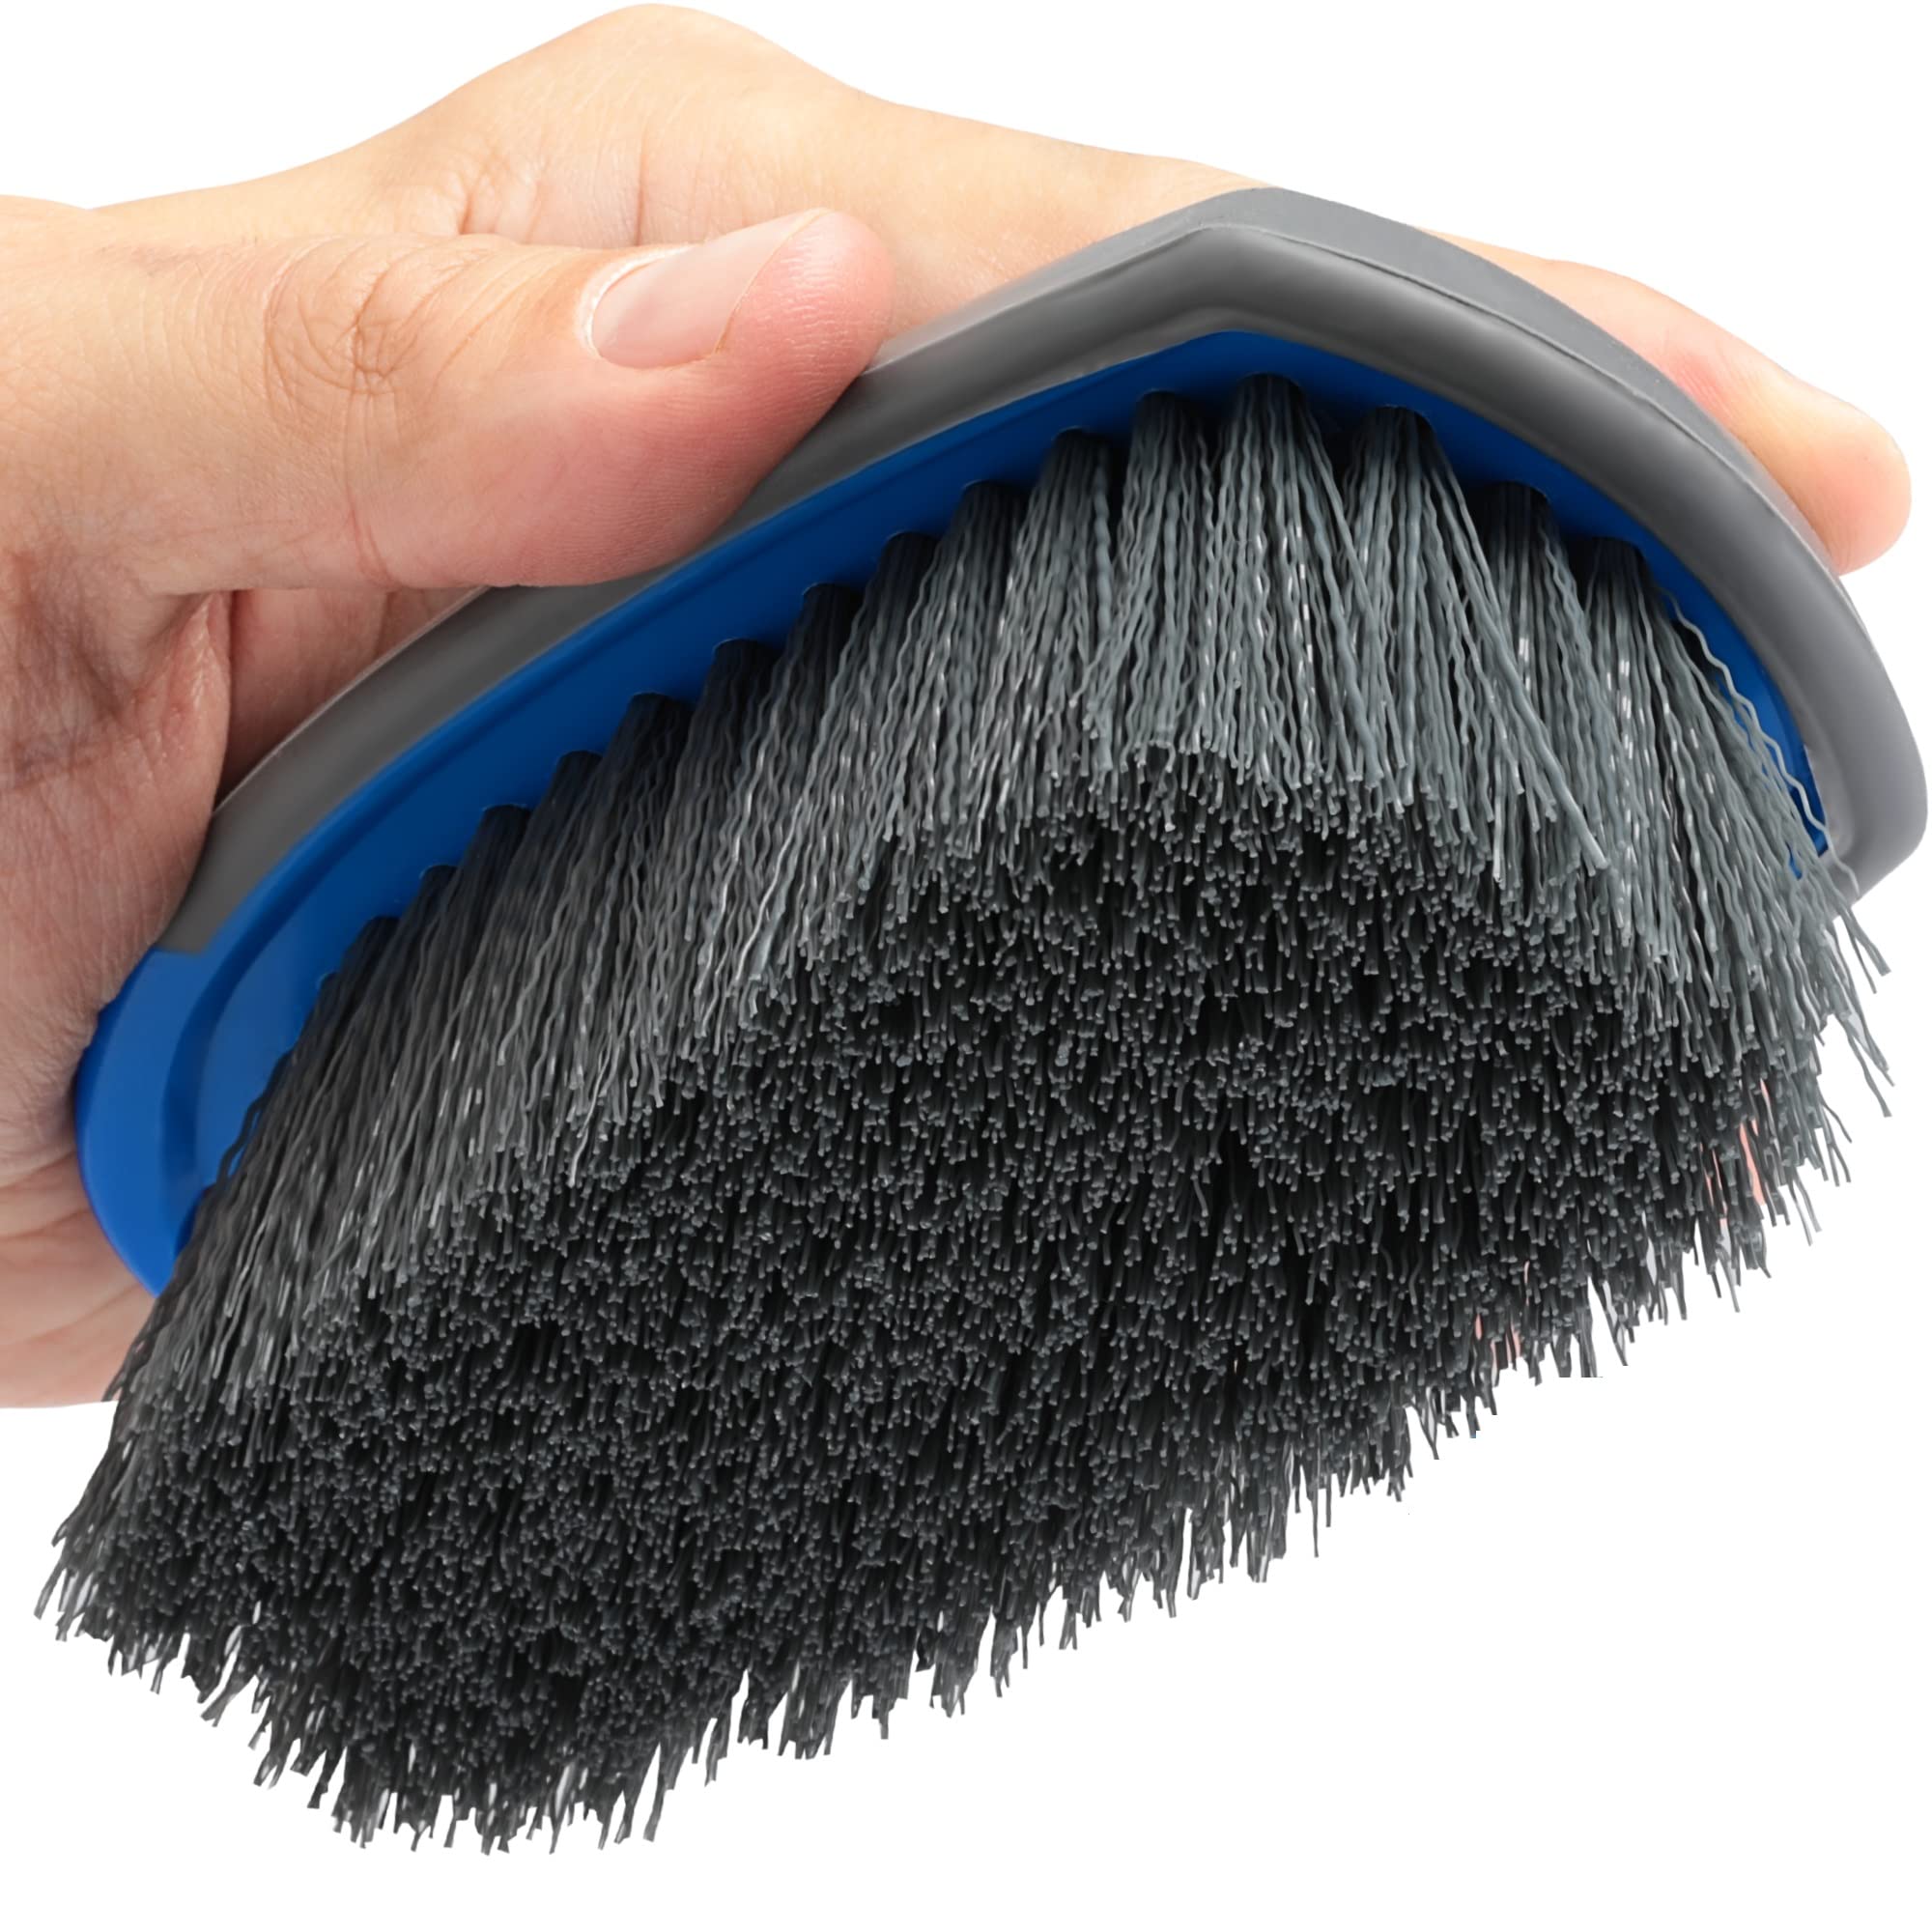 Pro Series Carpet and Upholstery Brush